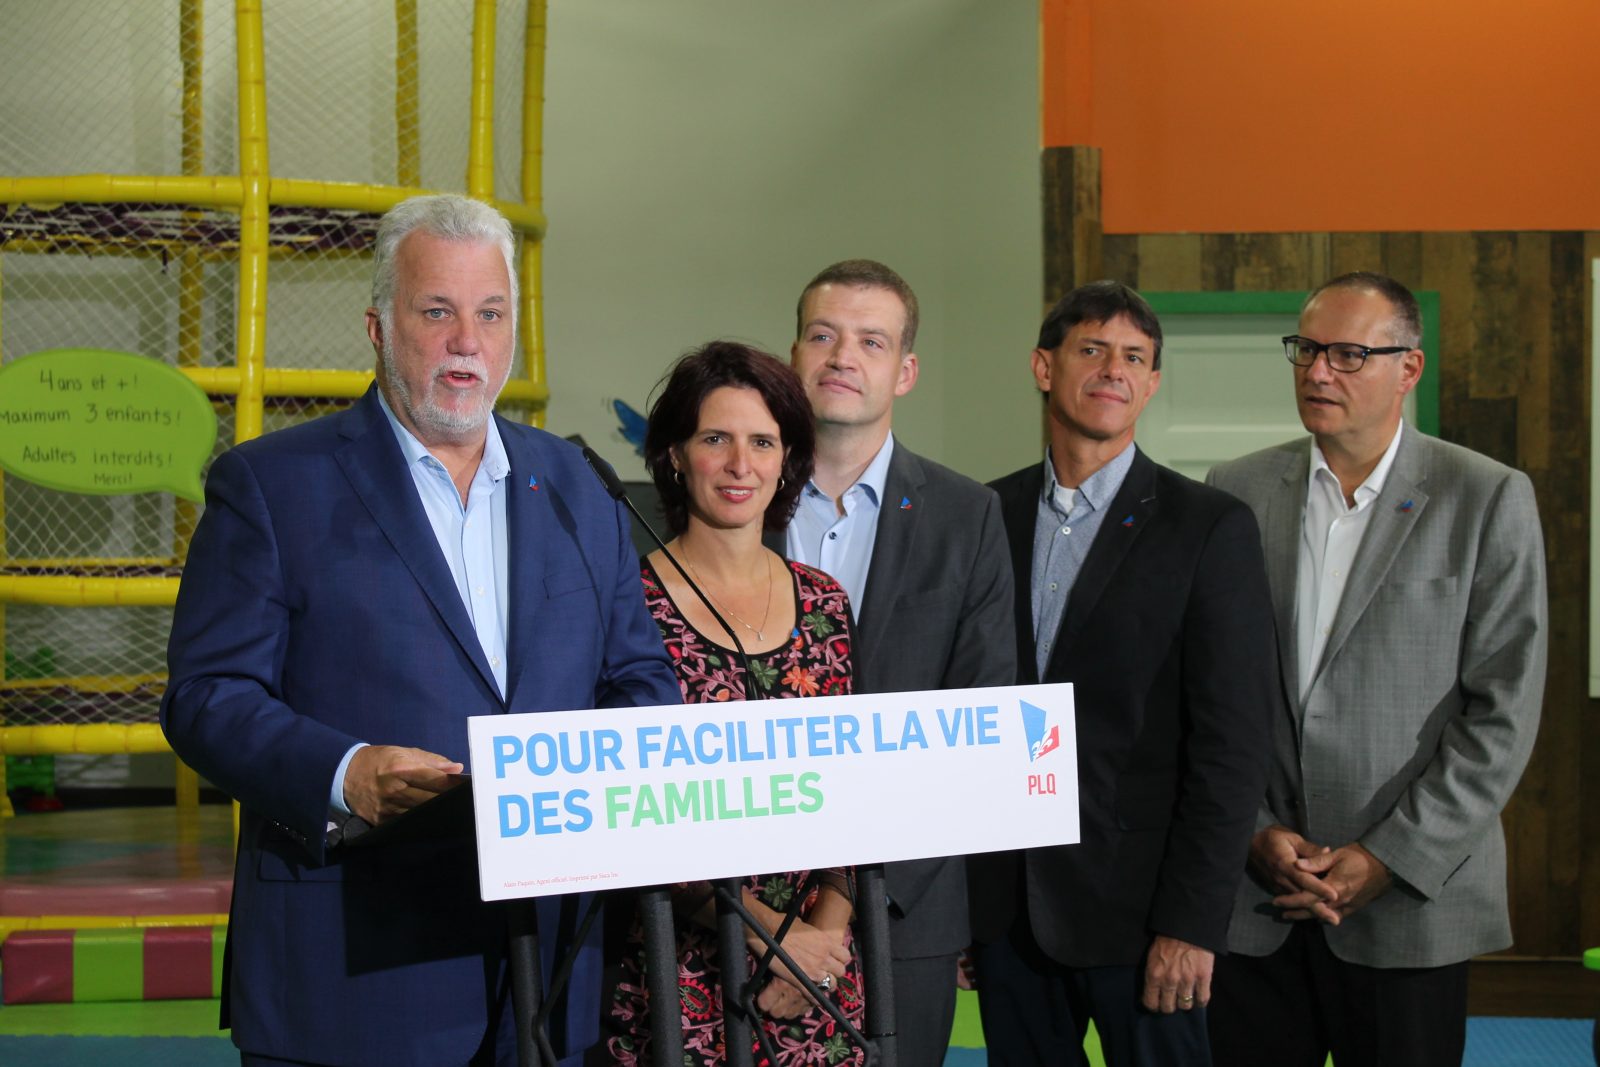 Couillard in Sherbrooke on  the lead up to Election Day